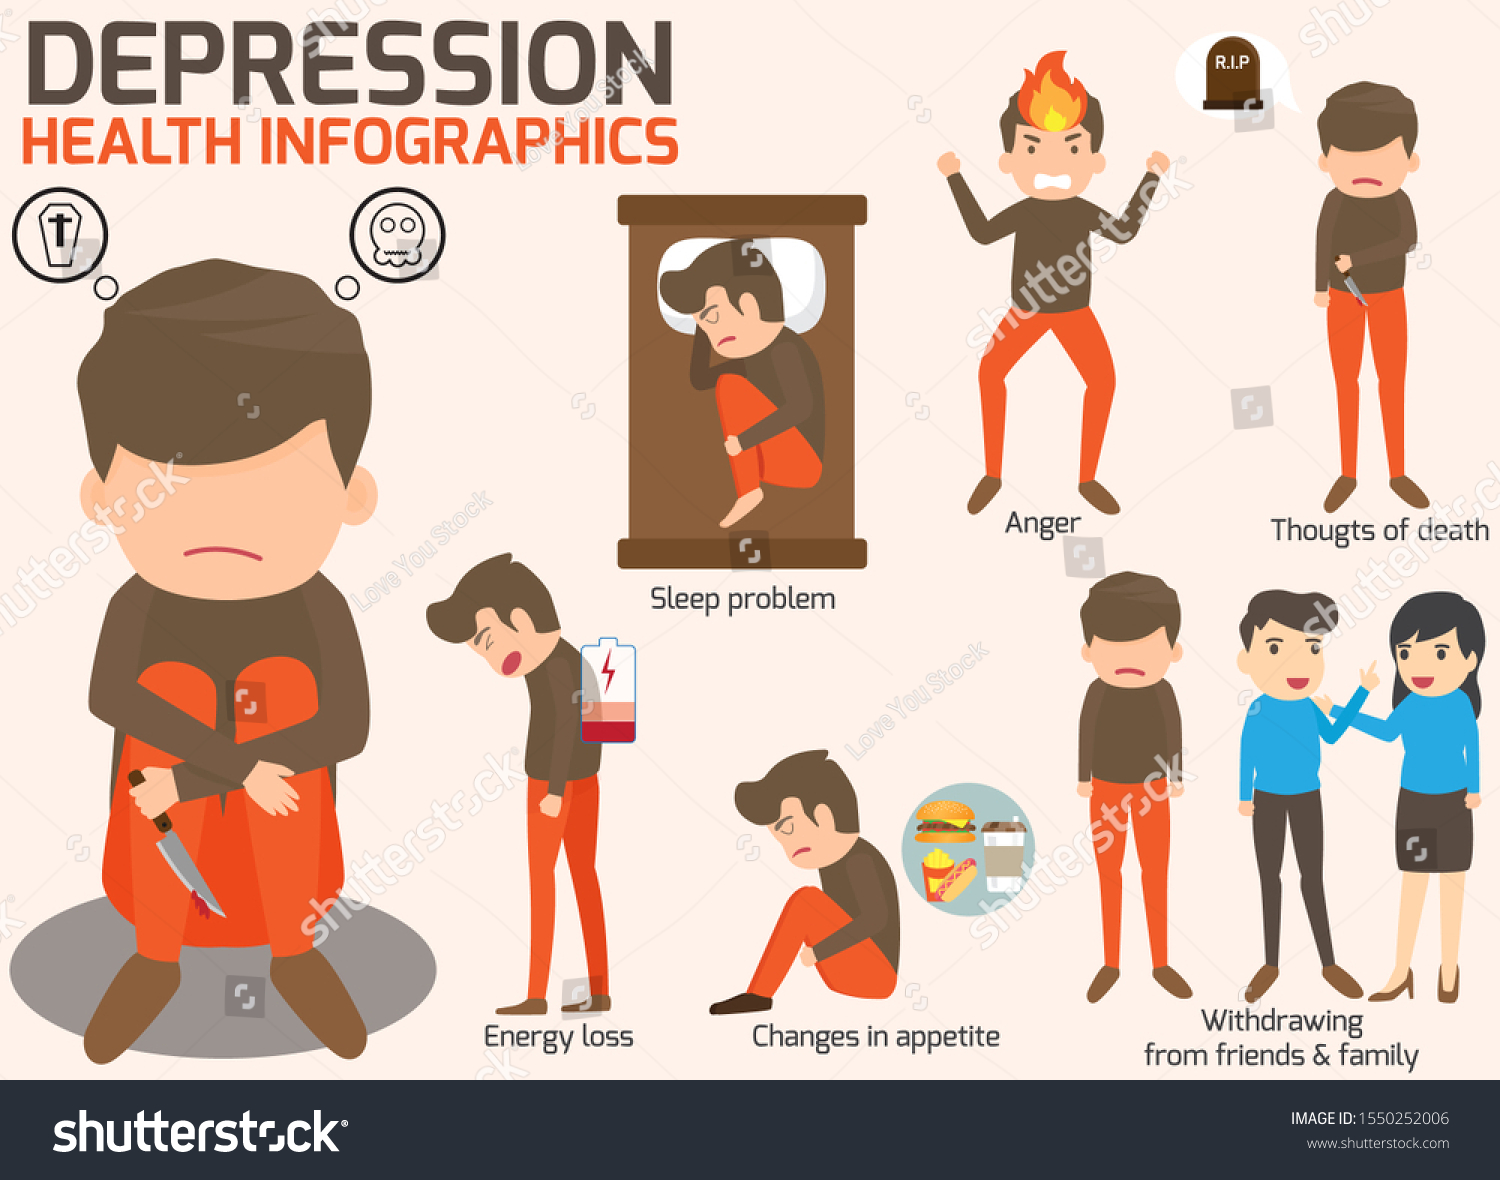 Depression Signs Symptoms Infographic Concept Major Stock Vector Royalty Free 1550252006 3493